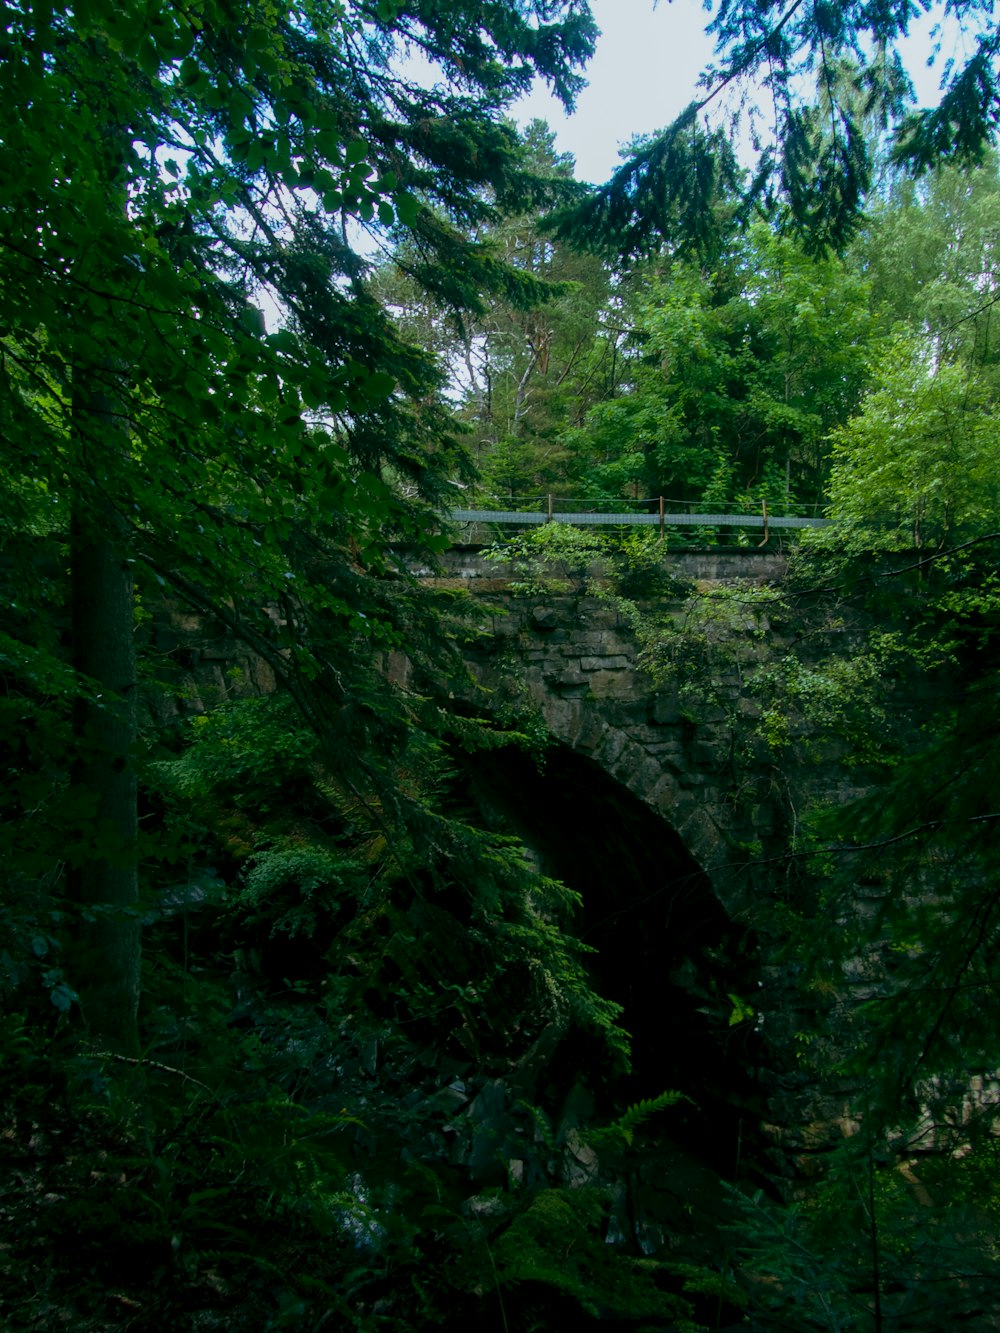 a bridge over a stream surrounded by trees